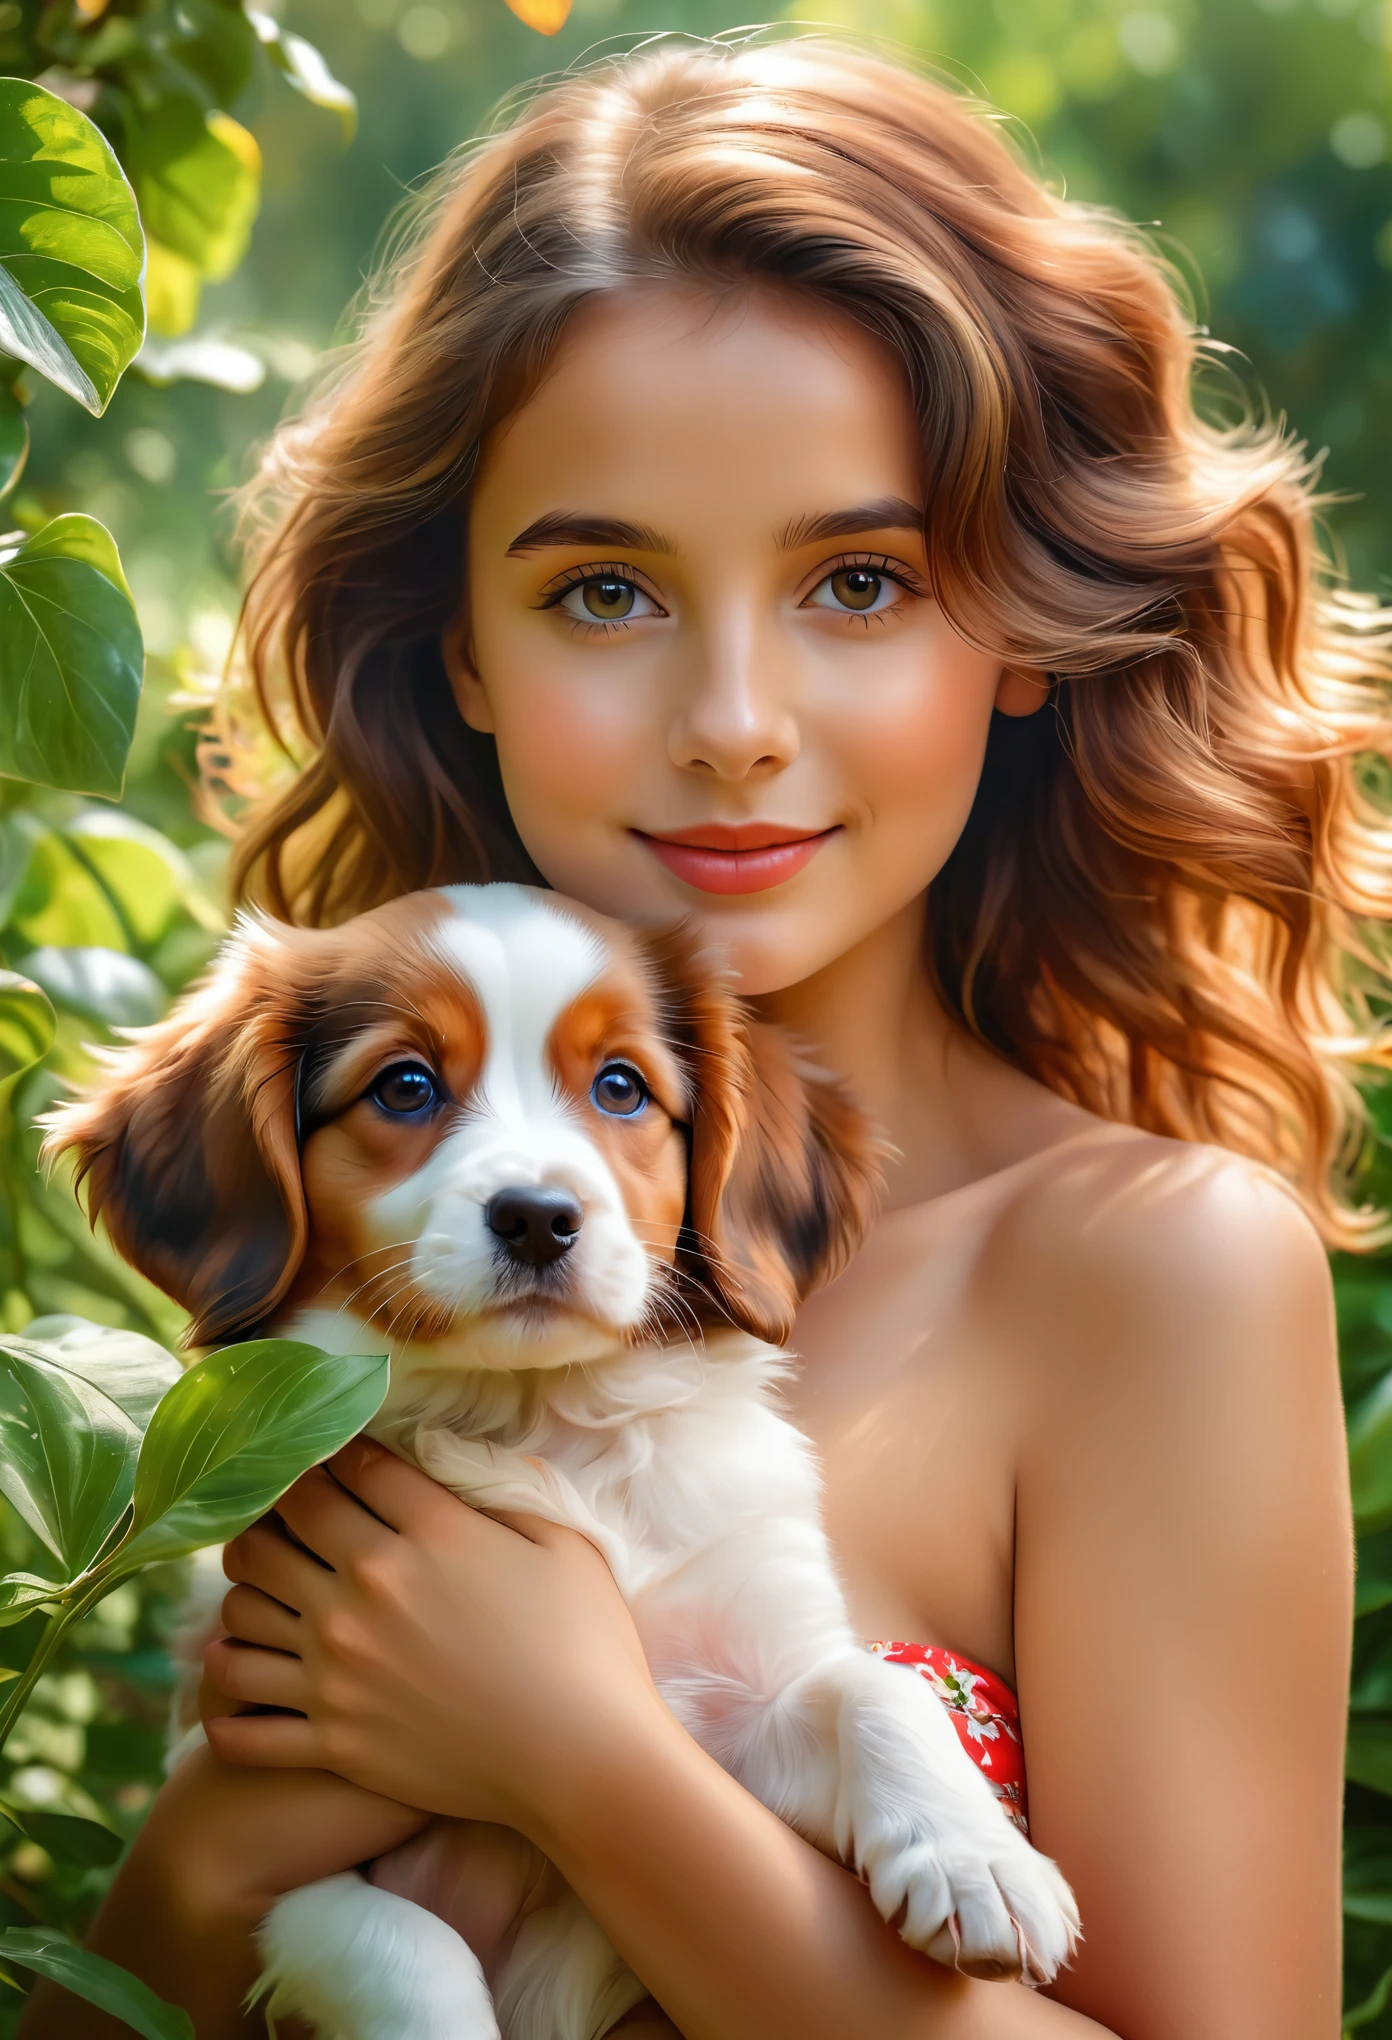 (top quality, 4k, 8K, a high resolution, masterpiece:1.2), very detailed, (realistic, photorealistic, photo-realistic:1.37), realistic,Portraits, beautiful NUDIST girl, holding kooikerhondje, paintings, soft strokes, Bright colors, garden background, detailed girl eyes, detailed girl lips, peaceful expression, little red bikini, figure, Tender smile, natural sunlight, lush greenery, playful puppy, Wavy hair, subtle shadows, fine features, captivating look, Sunlight penetrates through the trees, Botanical elements, Floral patterns, sweet connection, Bright and cheerful atmosphere, Innocent charm, loving bond between girl and puppy,accurate depiction of Kooikerhondje&#39;s appearance, Tender interaction,three-dimensional and realistic presentation,capture the emotional connection between people and animals, positive and emotional emotions, Impeccable attention to detail,carefully composed composition, realistic fur texture and color rendering, Subtle highlights and shading, Impressionistic style of painting, ethereal and dreamlike quality, blond hair, 16 years